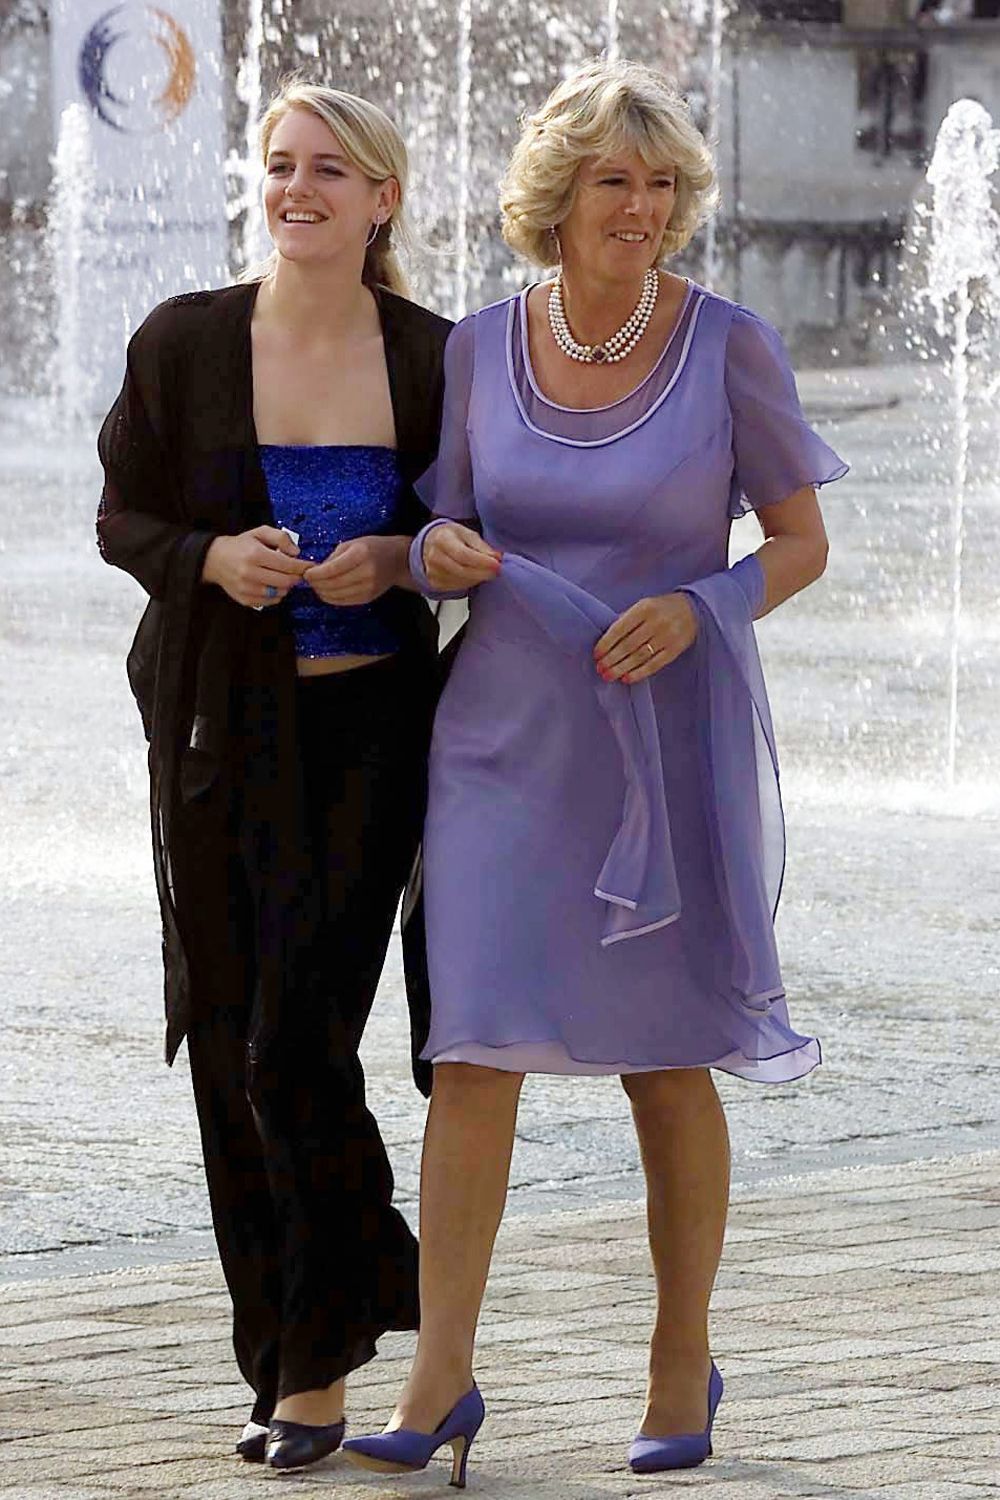 camilla-outfits-somerset-house-2001-1531324000.jpg